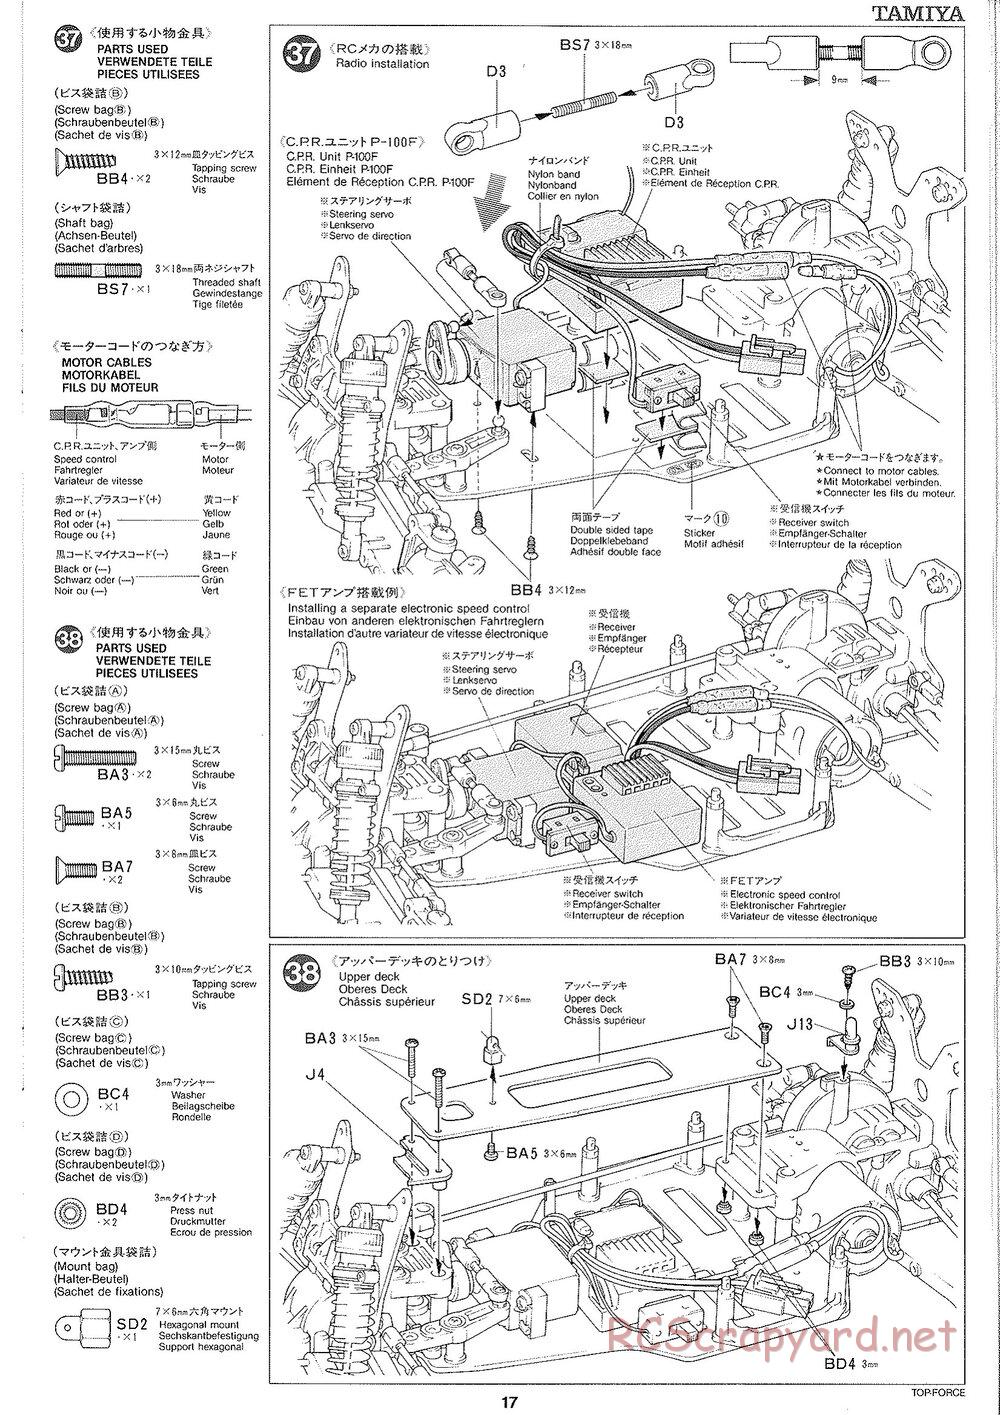 Tamiya - Top Force 2005 - DF-01 Chassis - Manual - Page 17